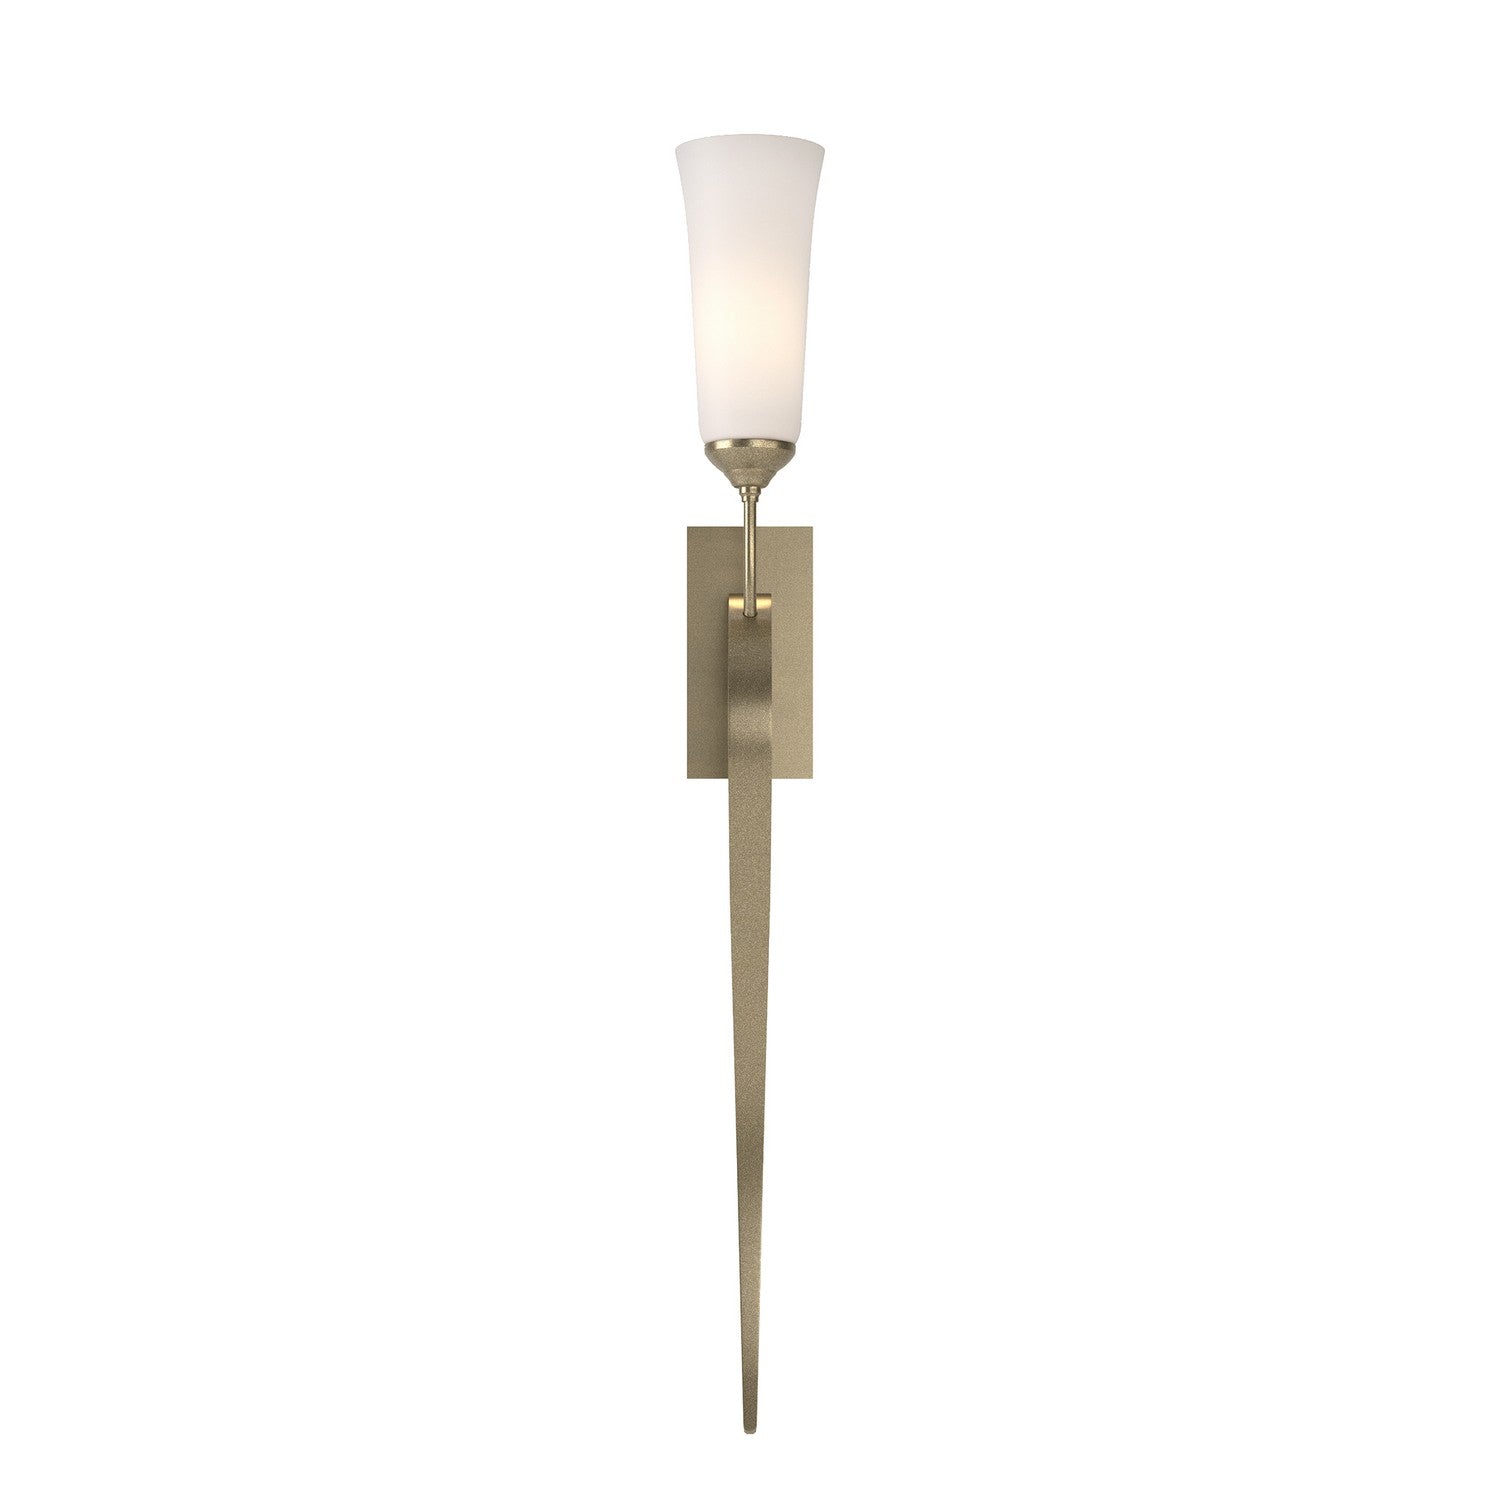 Hubbardton Forge - One Light Wall Sconce - Sweeping Taper - Soft Gold- Union Lighting Luminaires Decor